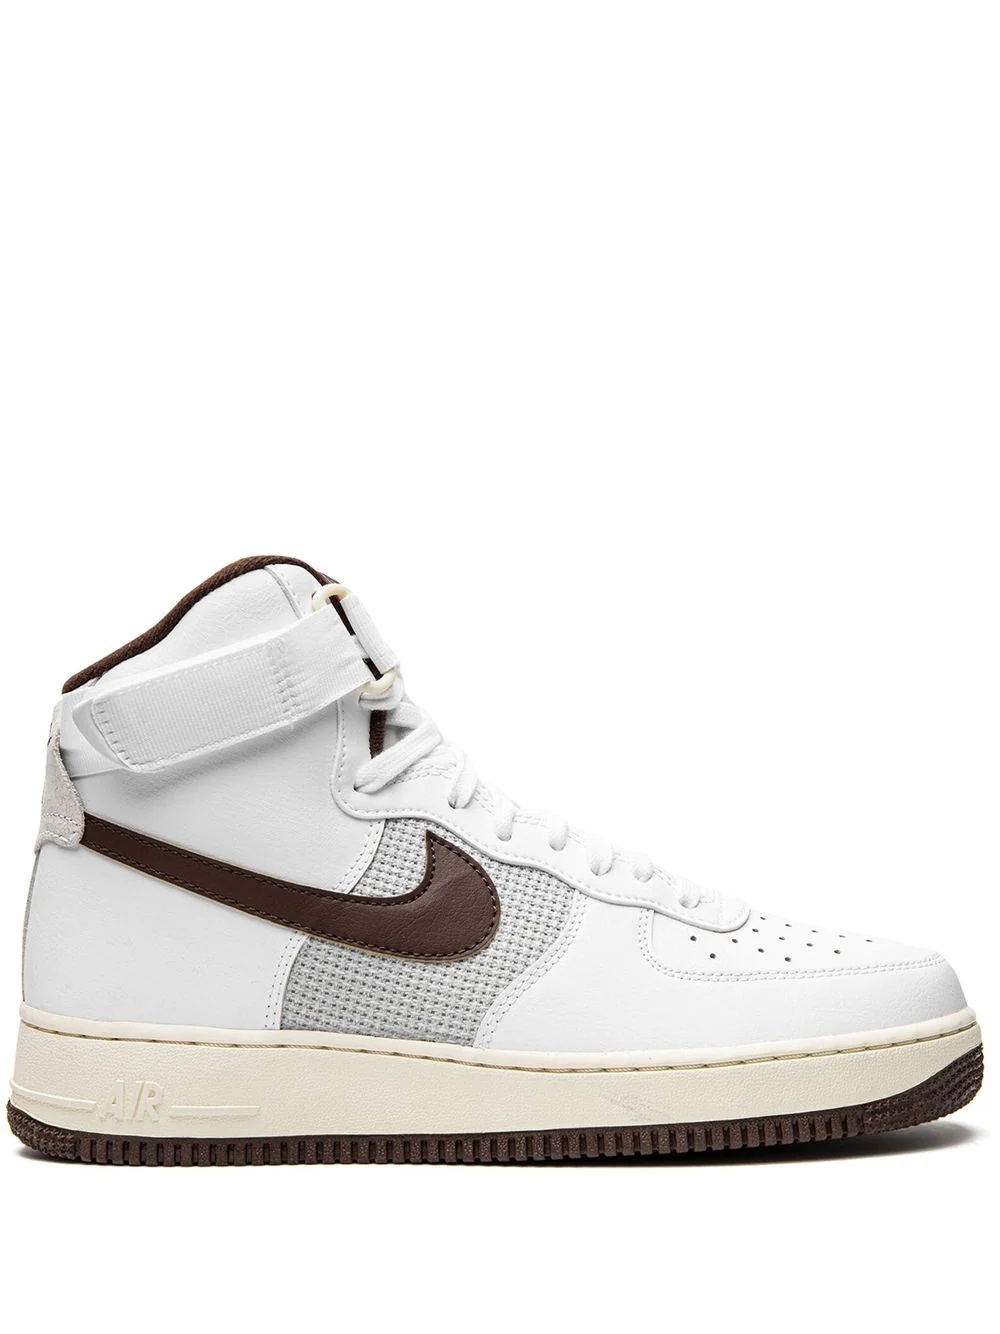 Air Force 1 High '07 "White Light Chocolate" sneakers - 1